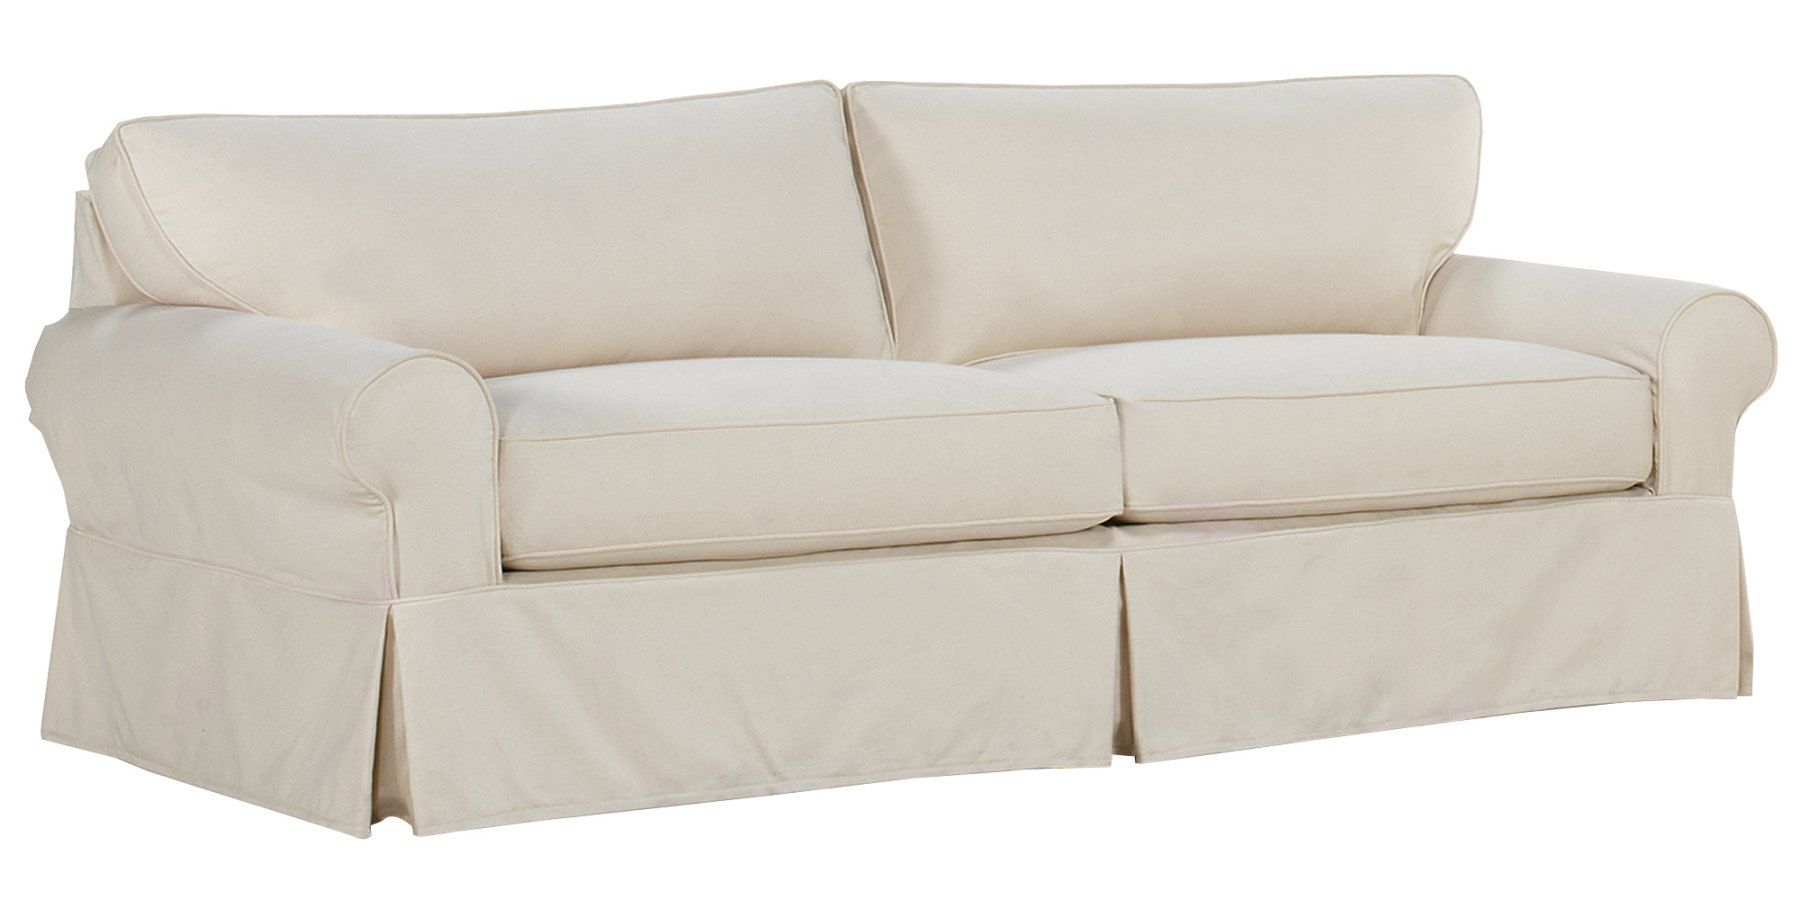 Comfortable Slipcovered Furniture Slipcover Sofas Couches Inside Slipcovers For Sofas And Chairs (View 1 of 15)